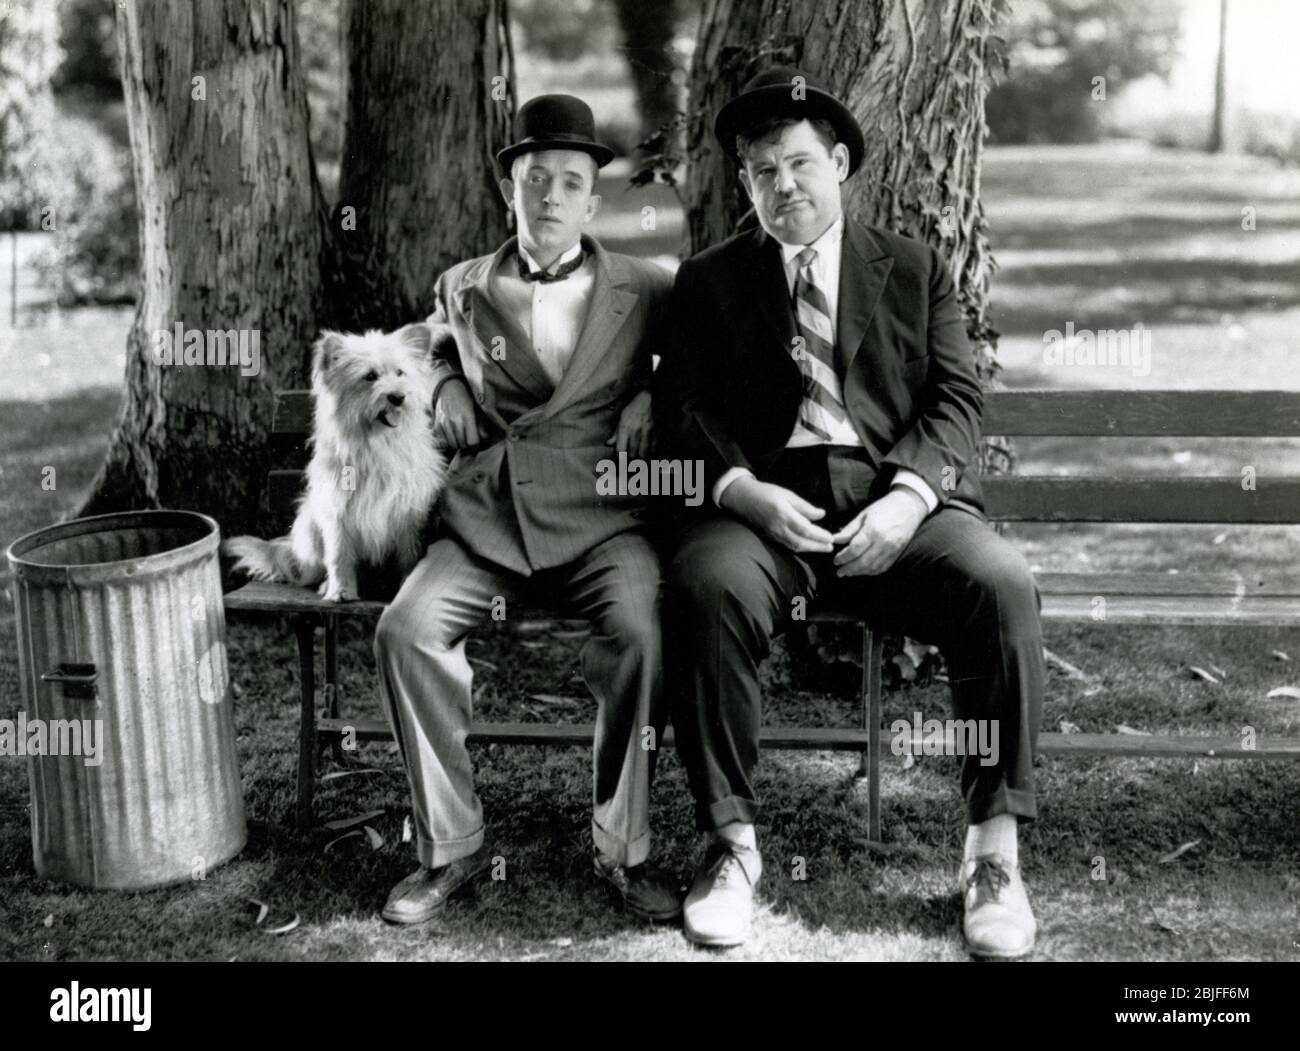 Laurel and Hardy sitting on a park bench in a scene from a classic silent comedy short subject, 'Early to Bed', 1928 from MGM. Stock Photo